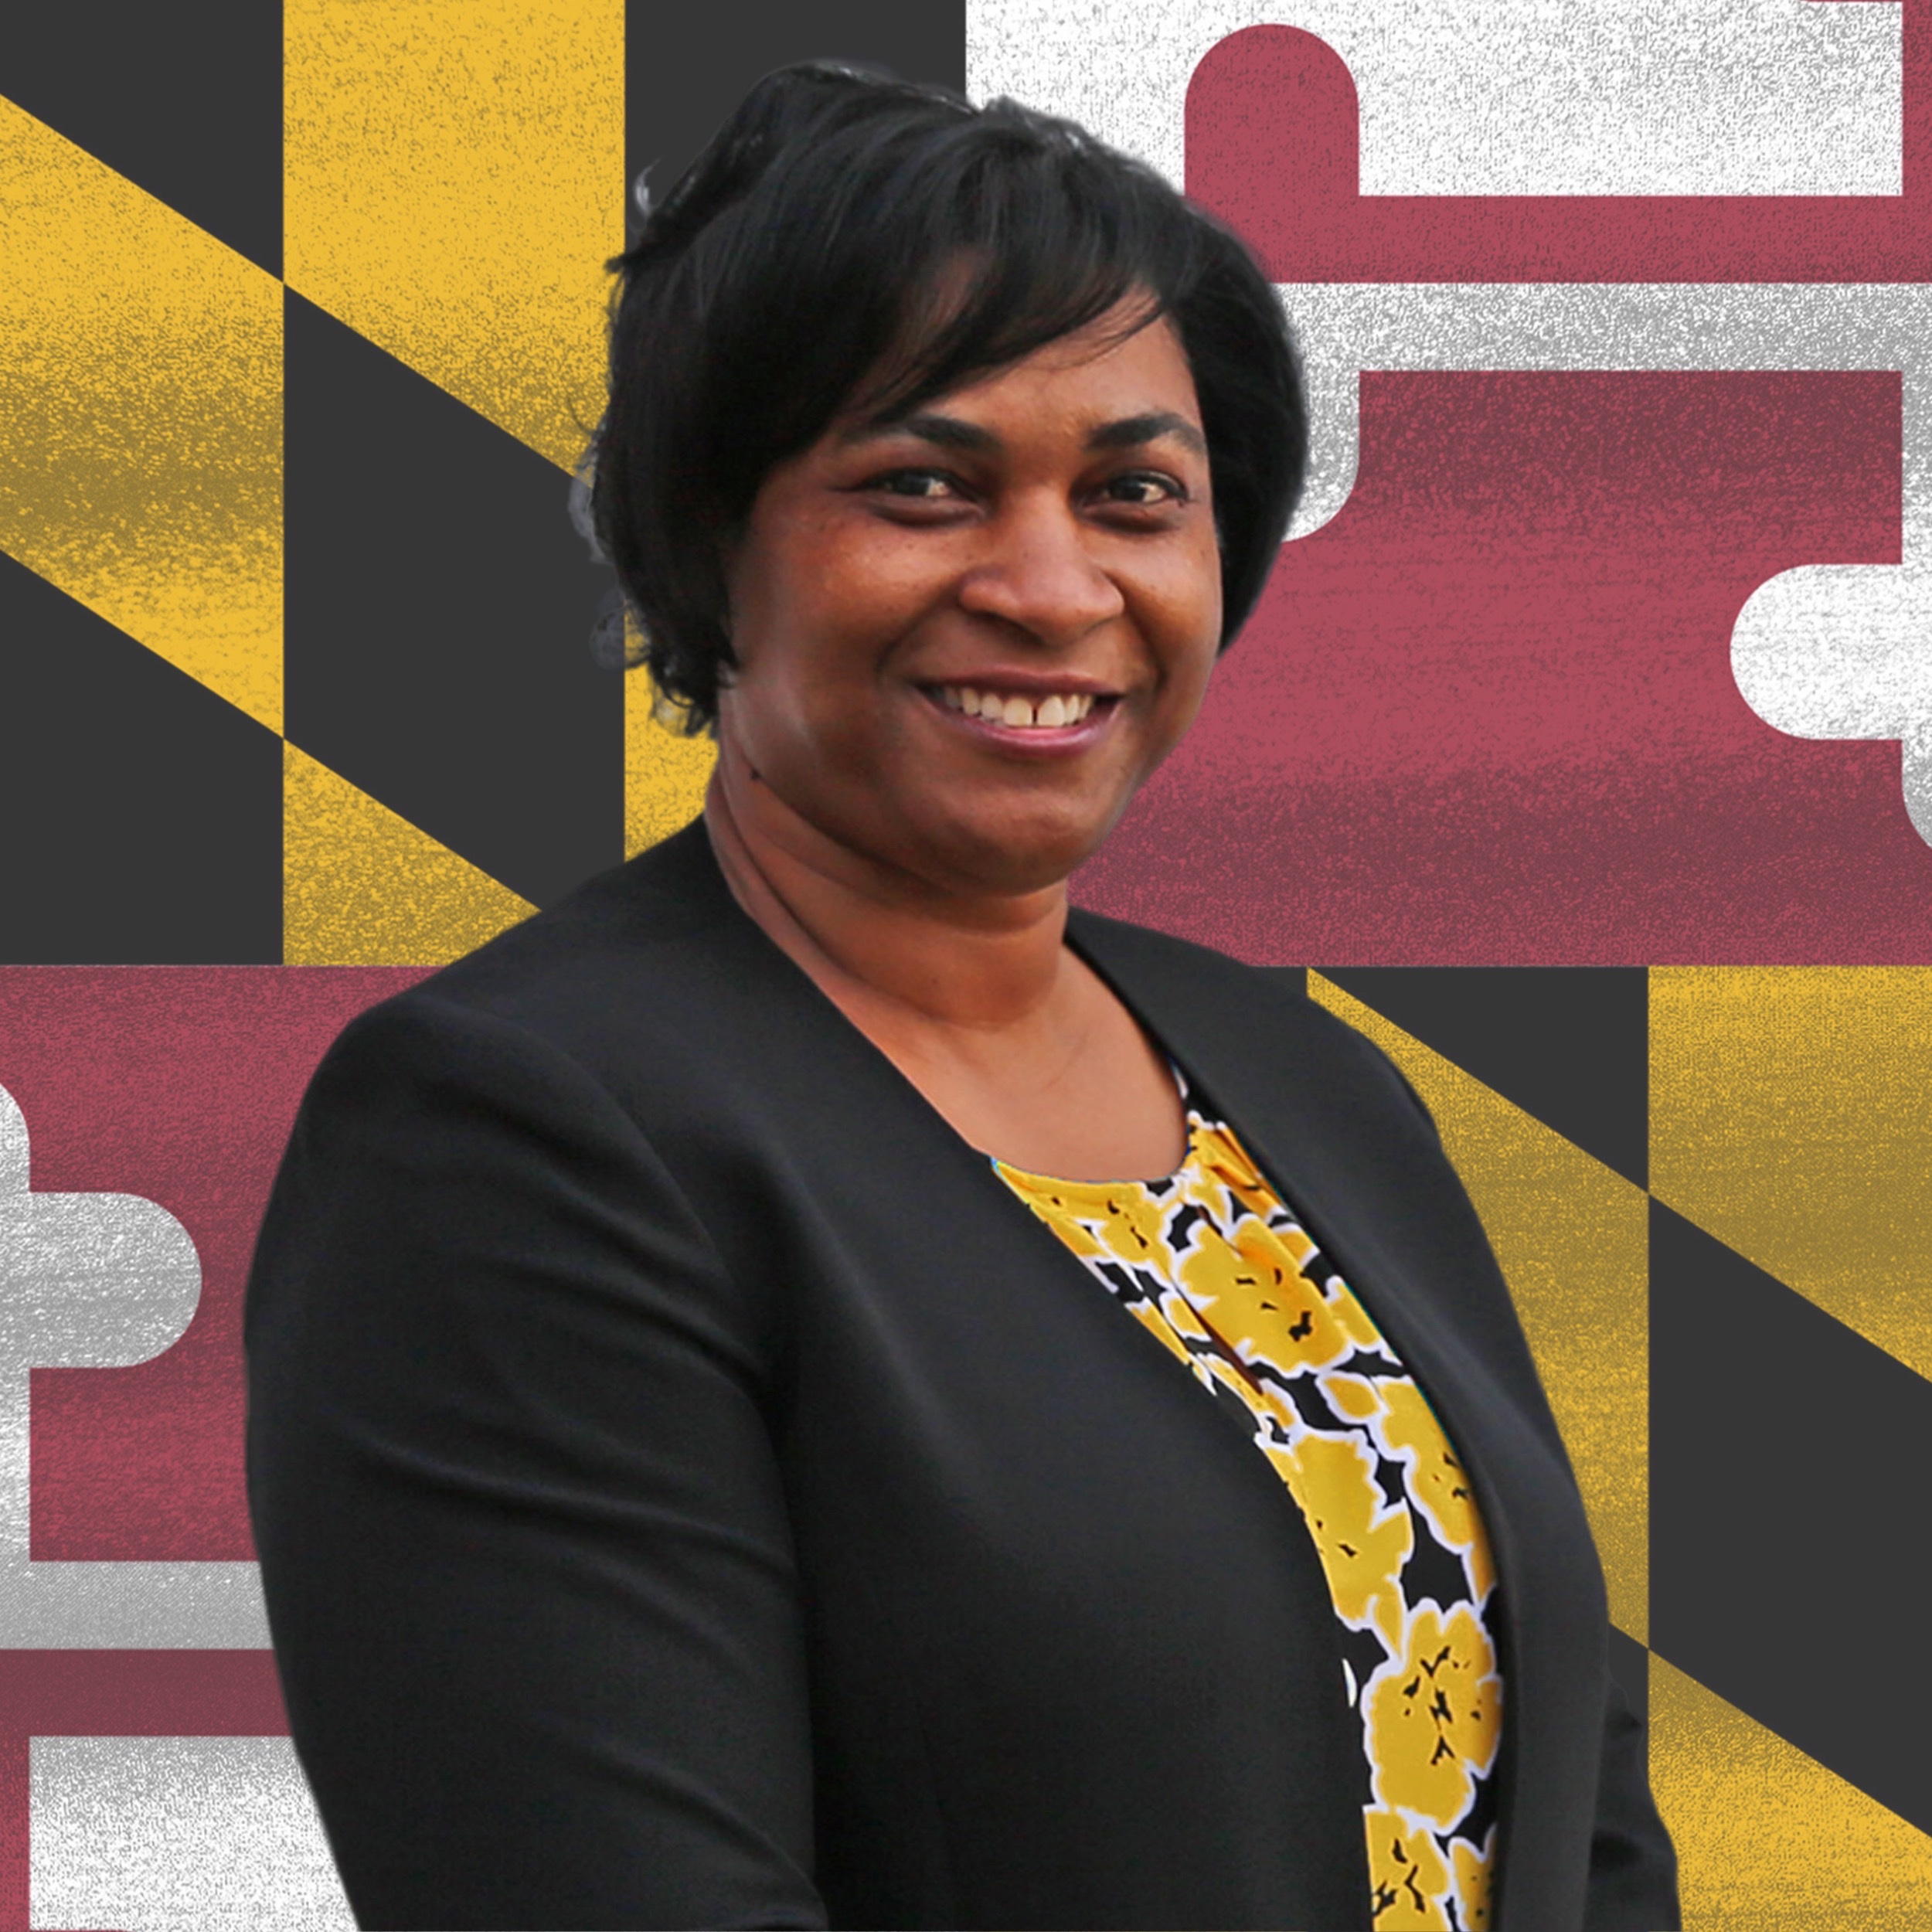 Lisa Yates, Clerk of the Circuit Court for Charles County, Maryland.